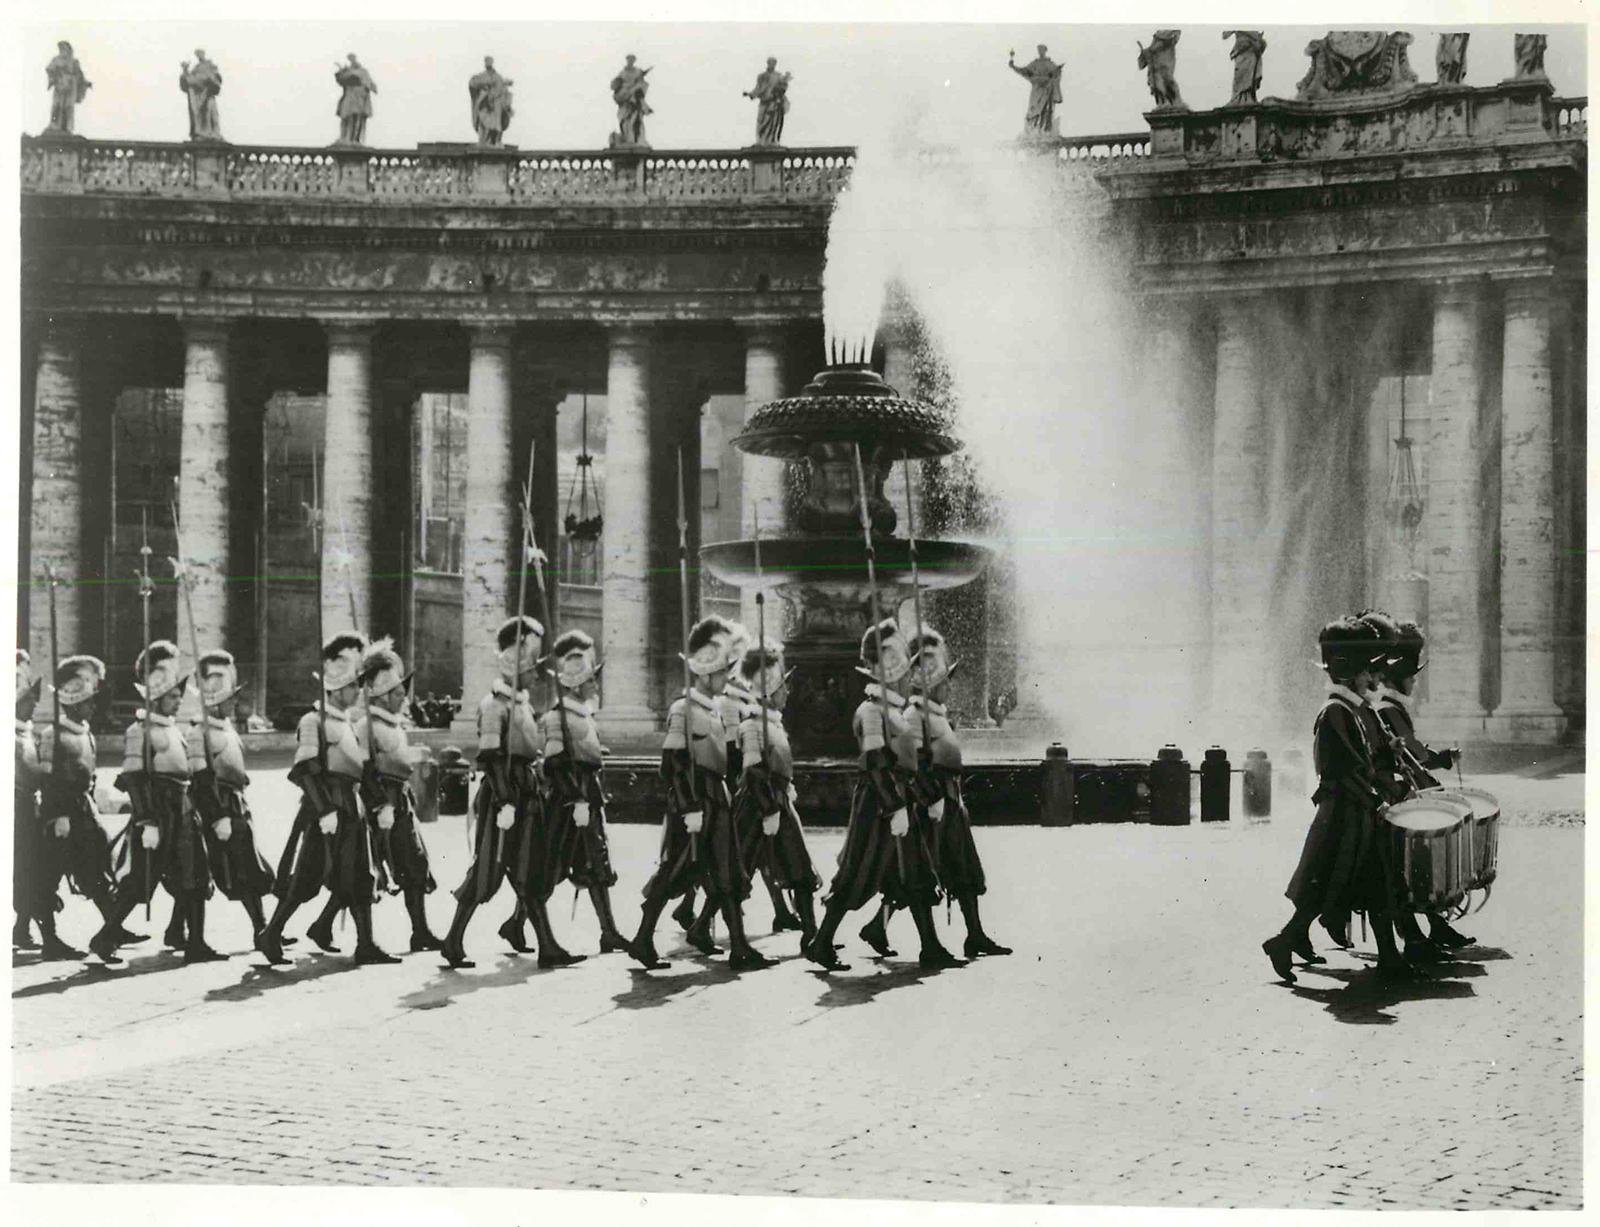 Members of the Swiss Guard march in a traditional manner at St. Peter's Square shortly before the opening of the Second Vatican Council in Oct. 1962. RNS archive photo